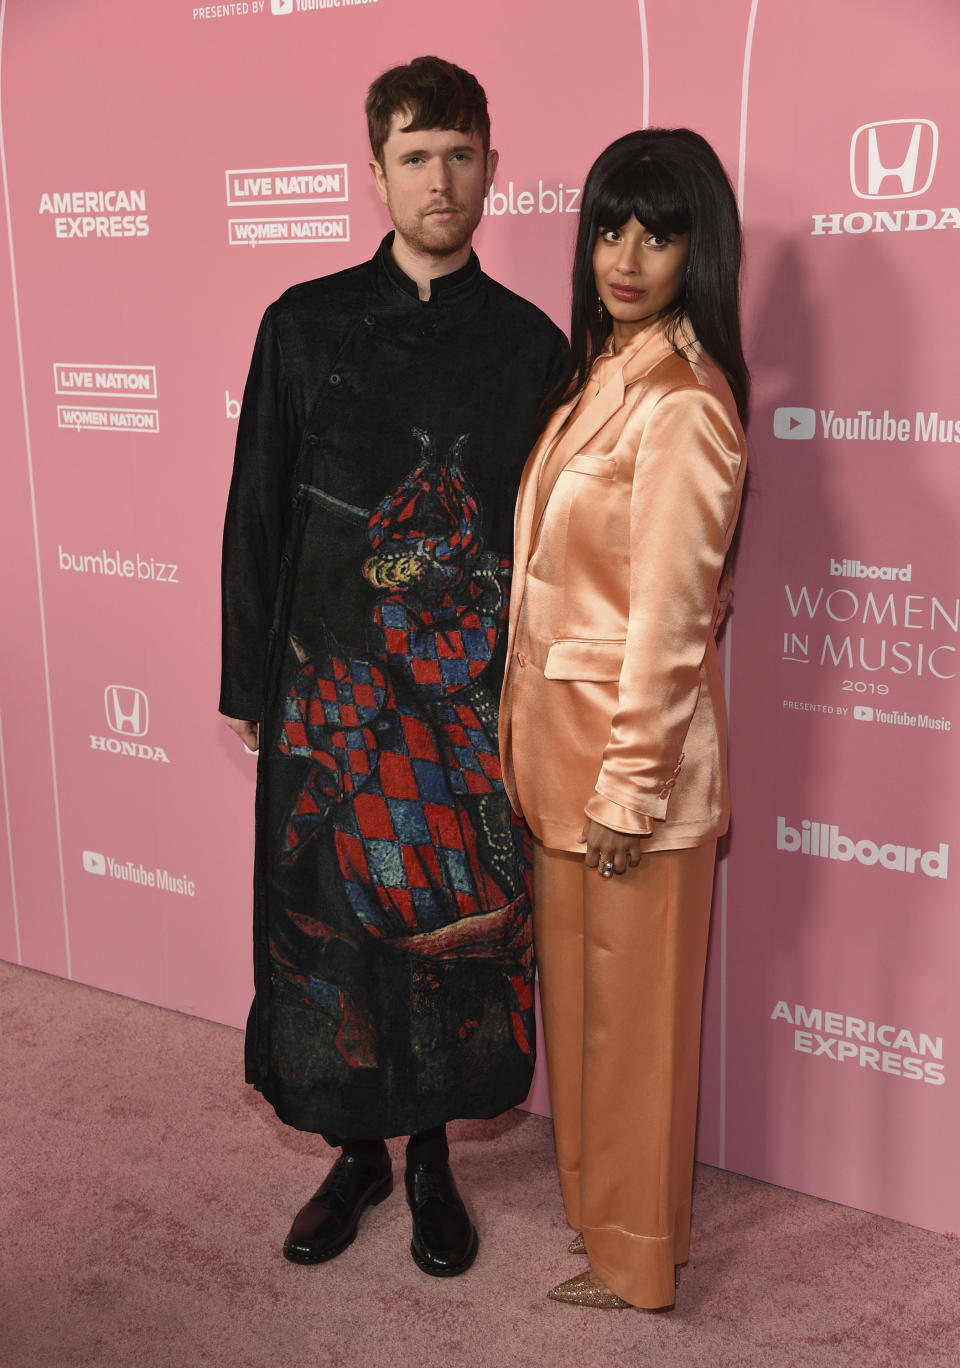 James Blake, left, and Jameela Jamil arrive at Billboard's Women in Music at the Hollywood Palladium on Thursday, Dec. 12, 2019, in Los Angeles. (AP Photo/Chris Pizzello)